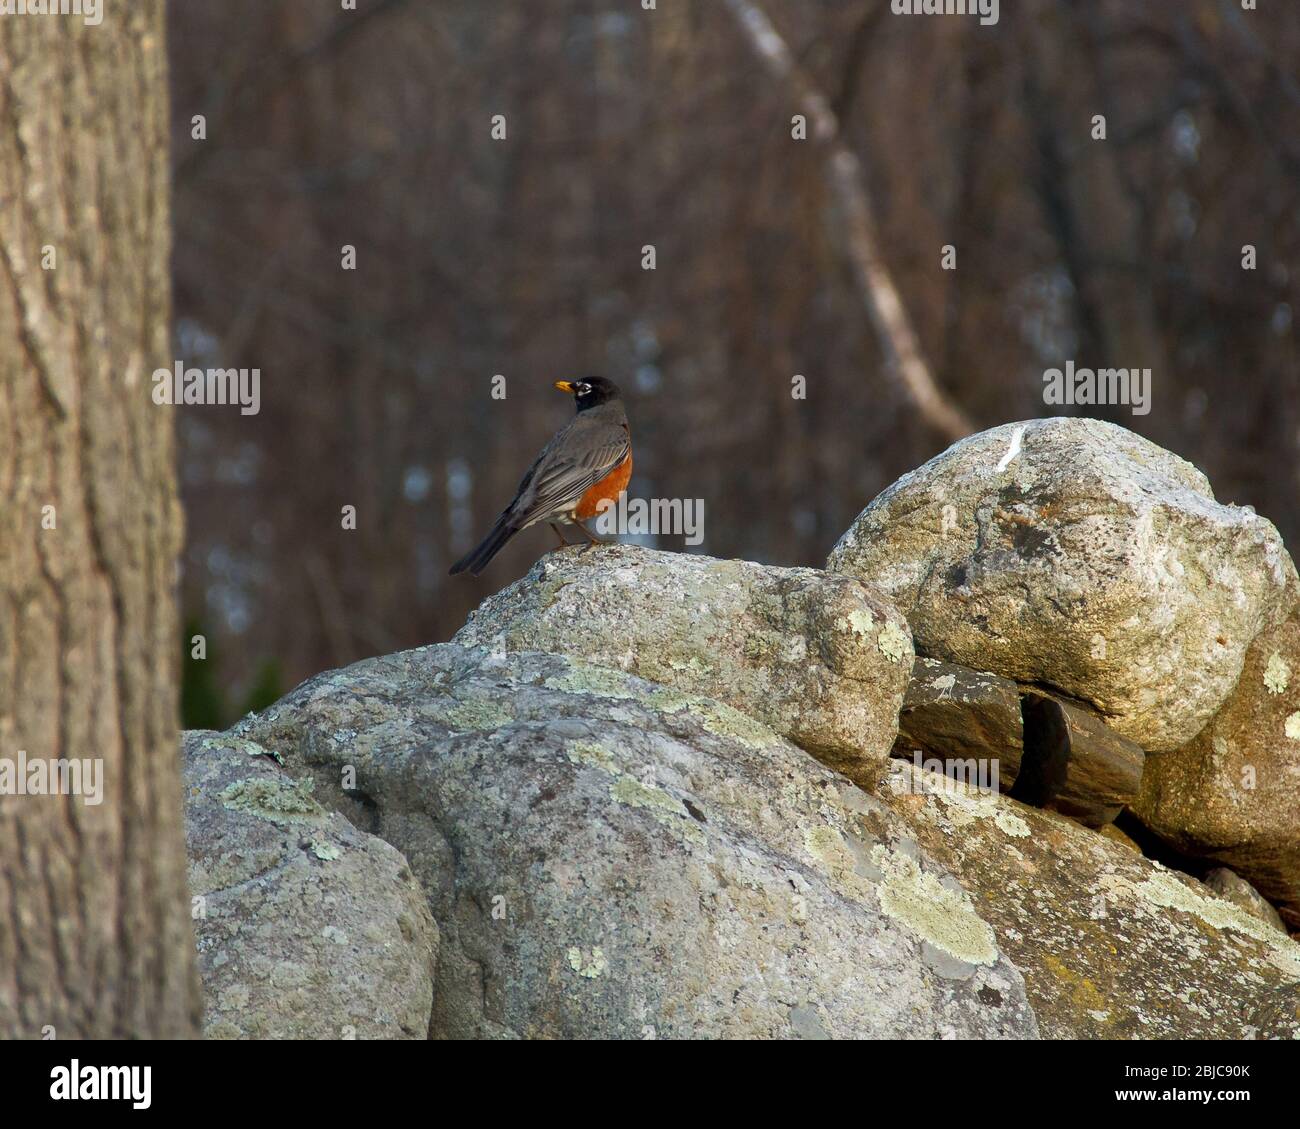 A robin pauses on a stone wall on an early springtime day in New England. Stock Photo